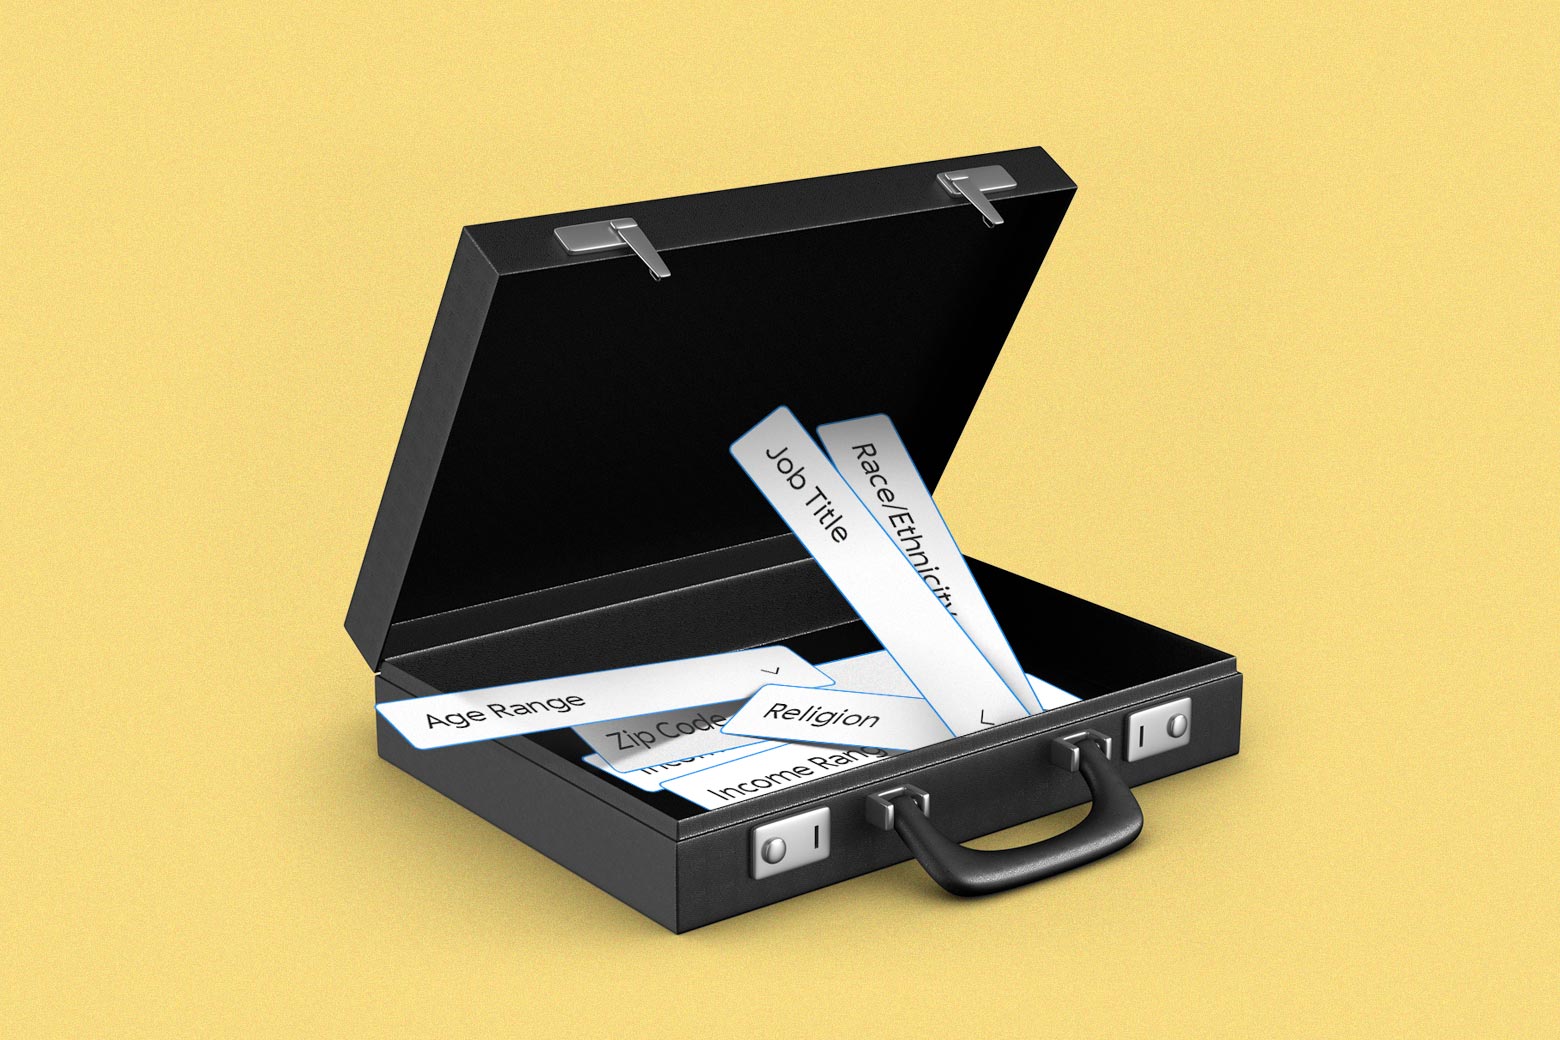 An open briefcase with slips of paper spilling out that read "job title," "age range," "religion," "race/ethnicity," and "ZIP code." 